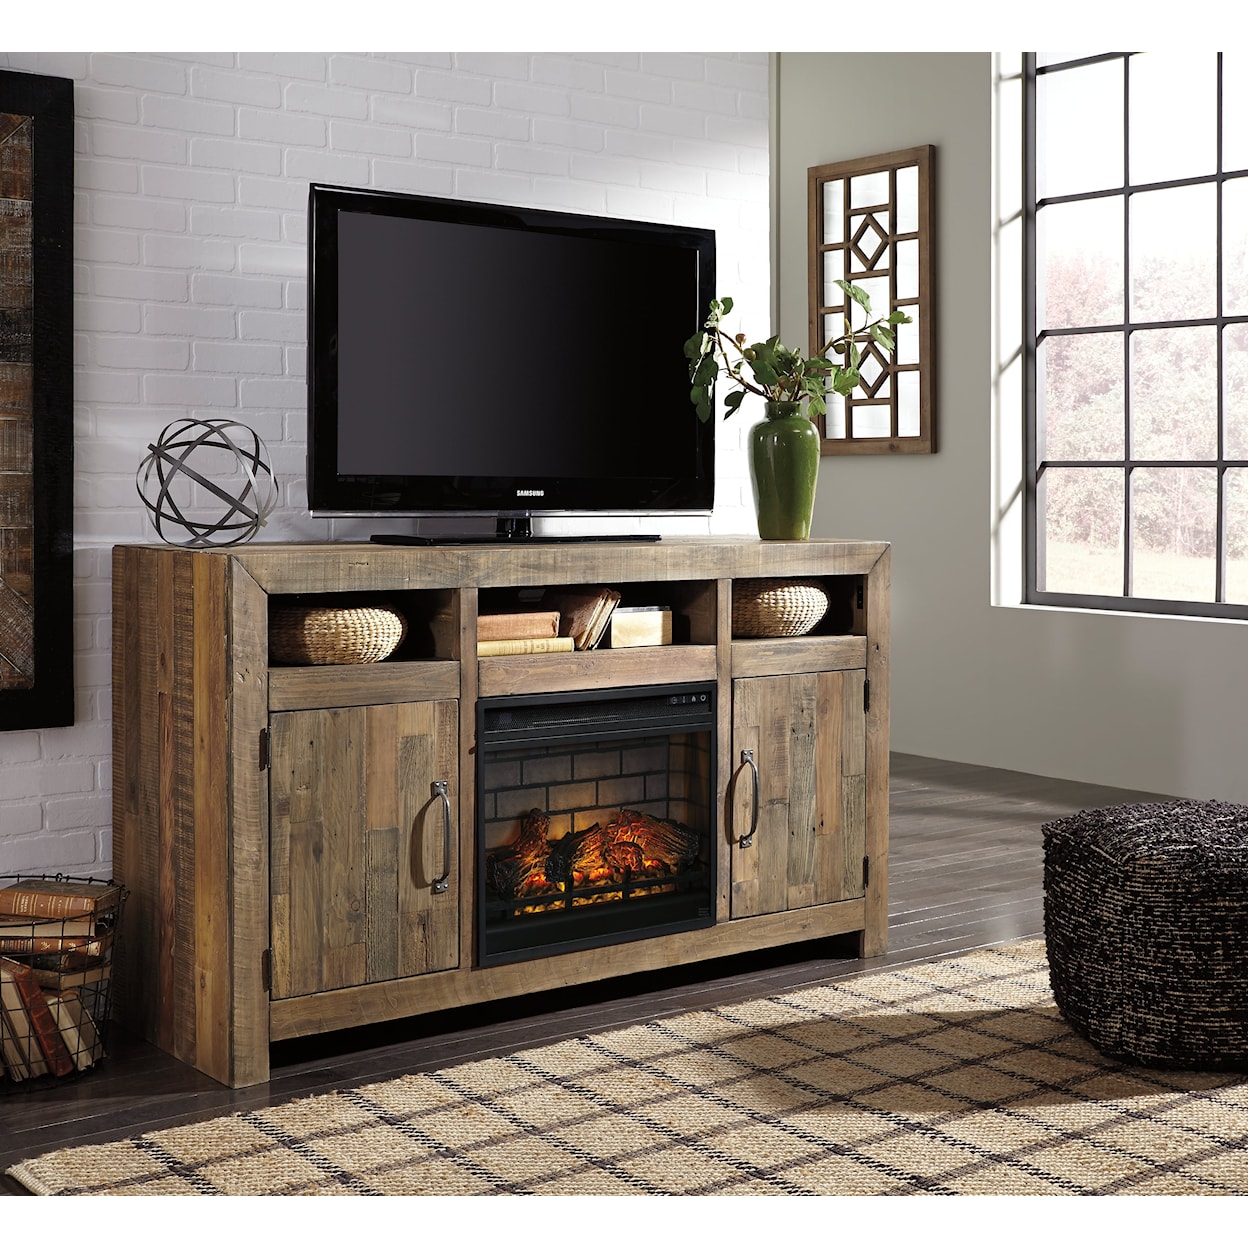 Signature Design by Ashley Sommerford 62" TV Stand with Electric Fireplace